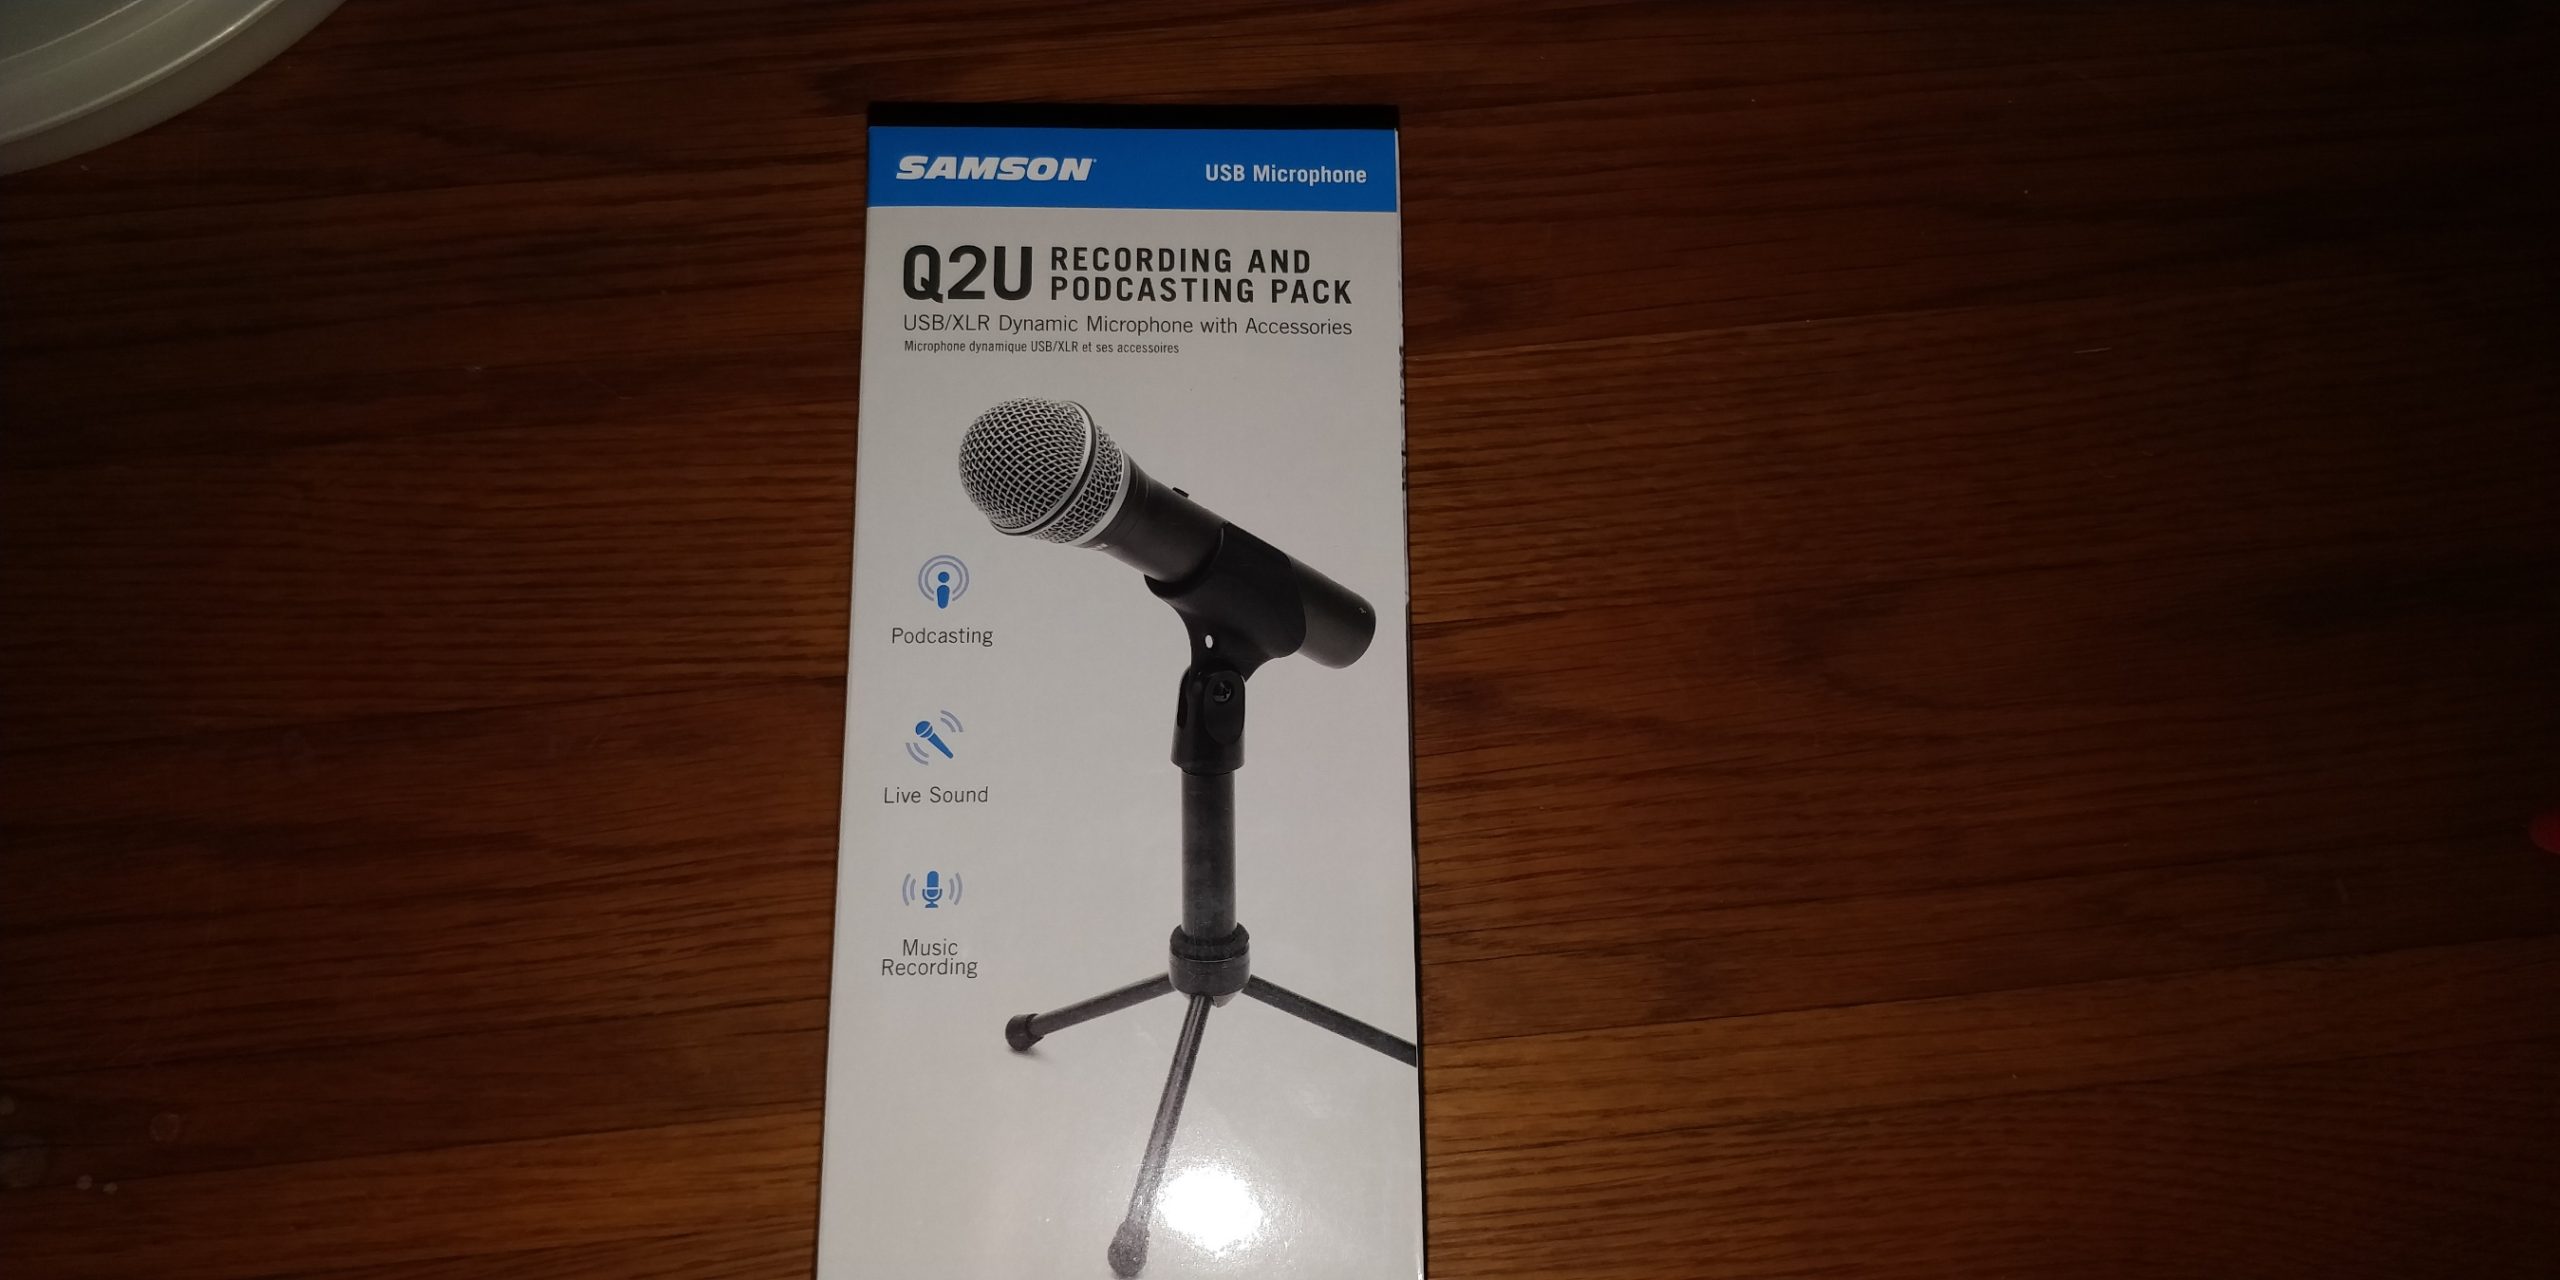 Review: Samson Q2U Recording and Podcasting Pack –